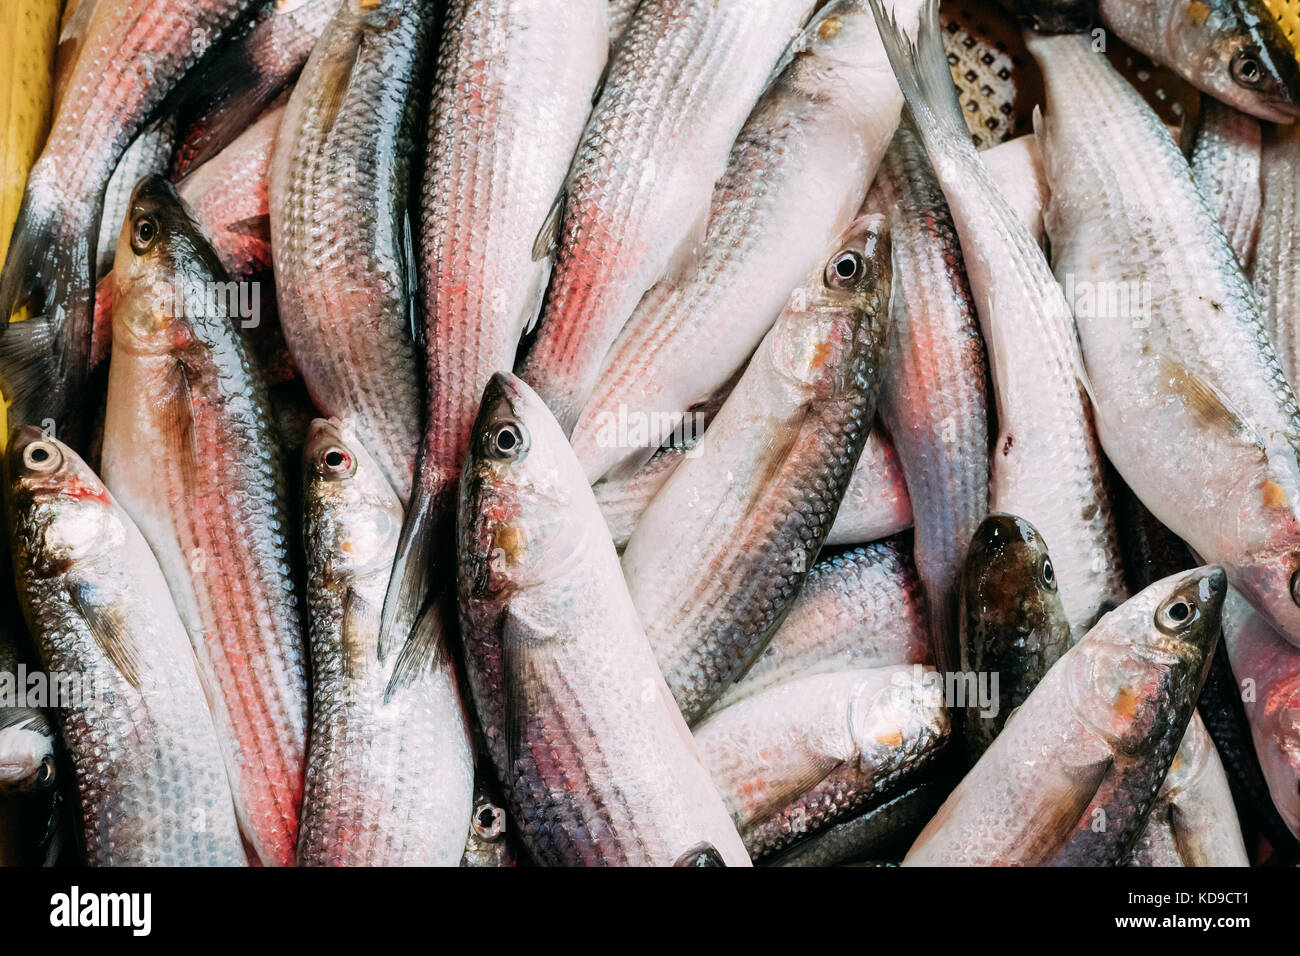 Fresh Mugil On Display On Ice On Fishermen Market Store Shop. Mugil Is A Genus Of Mullet In The Family Mugilidae. Seafood Fish Background. Stock Photo